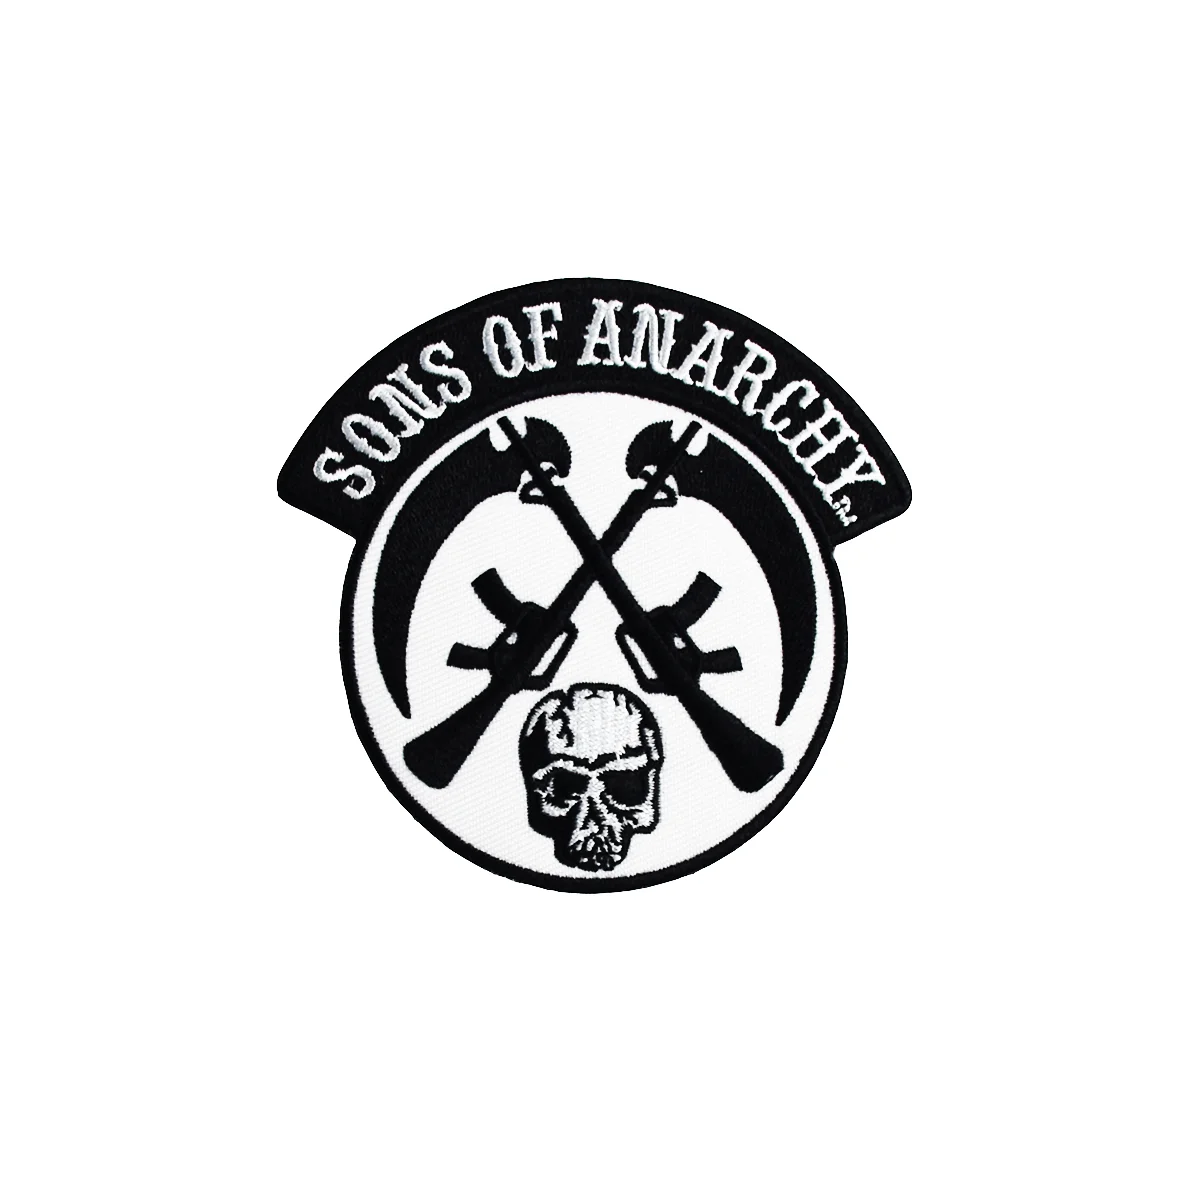 SONS OF ANARCHY GUN STYLE PATCH .RIGHT FACING.SEW OR IRON ON PATCH 